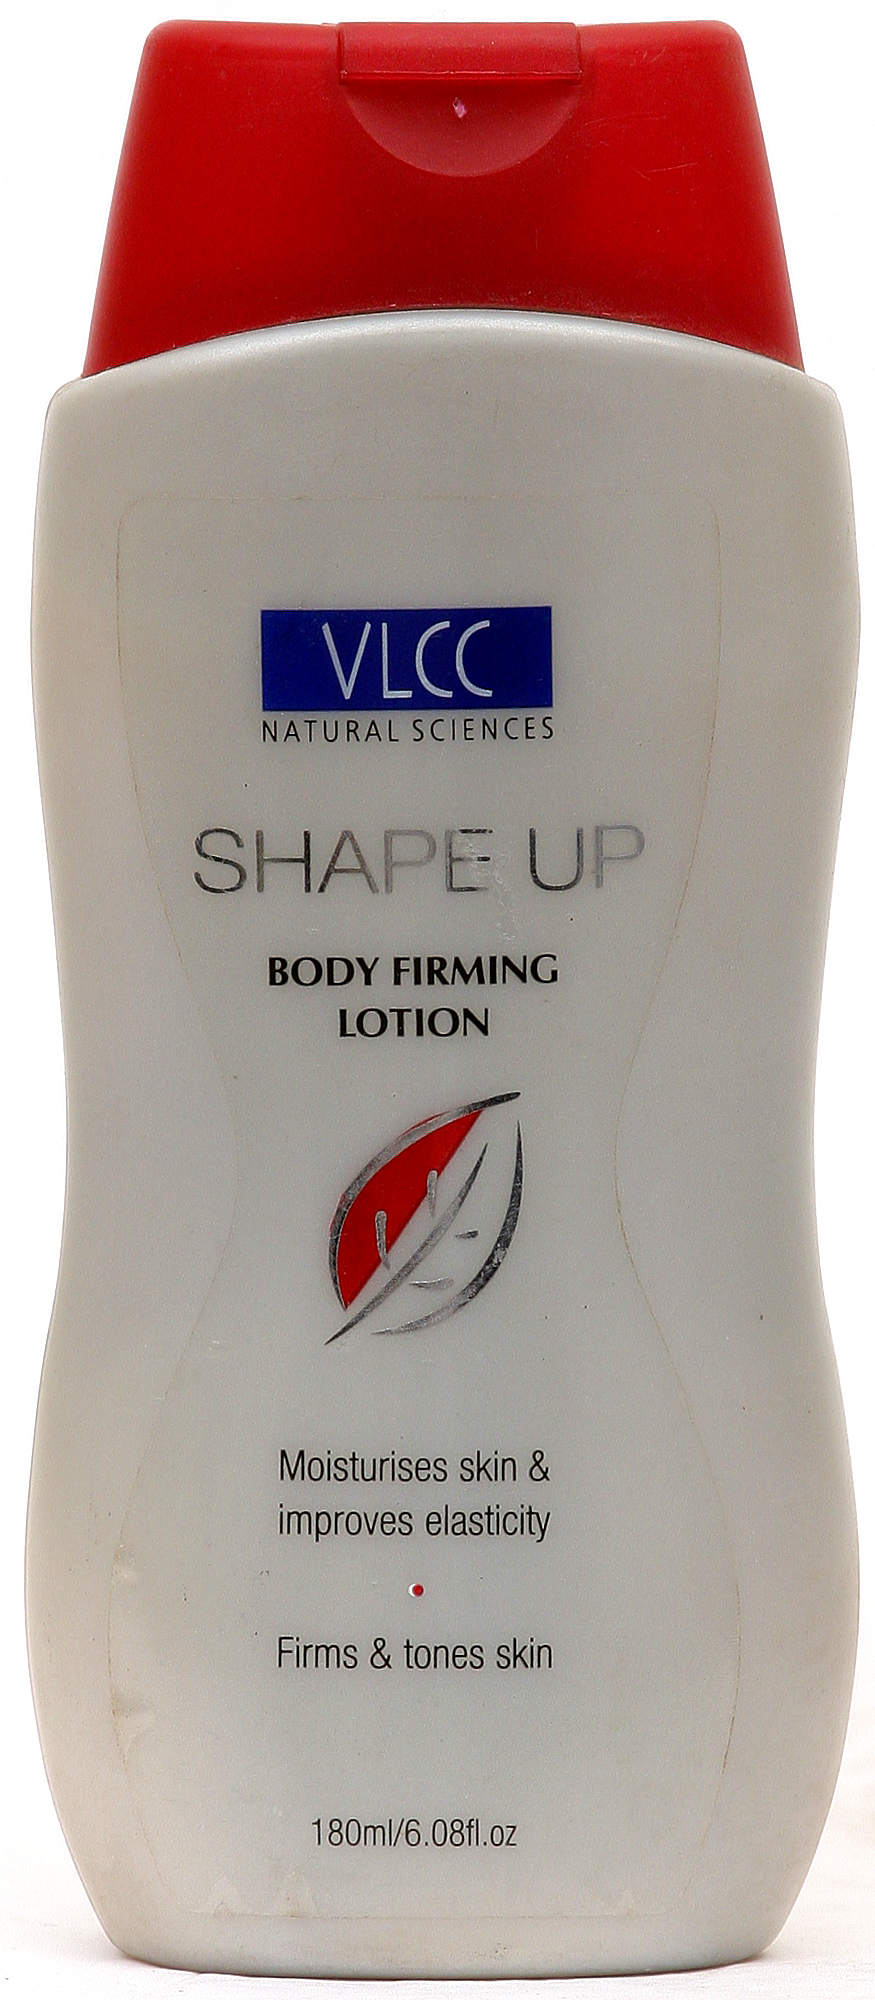 Vlcc Shape Up Body Firming Lotion